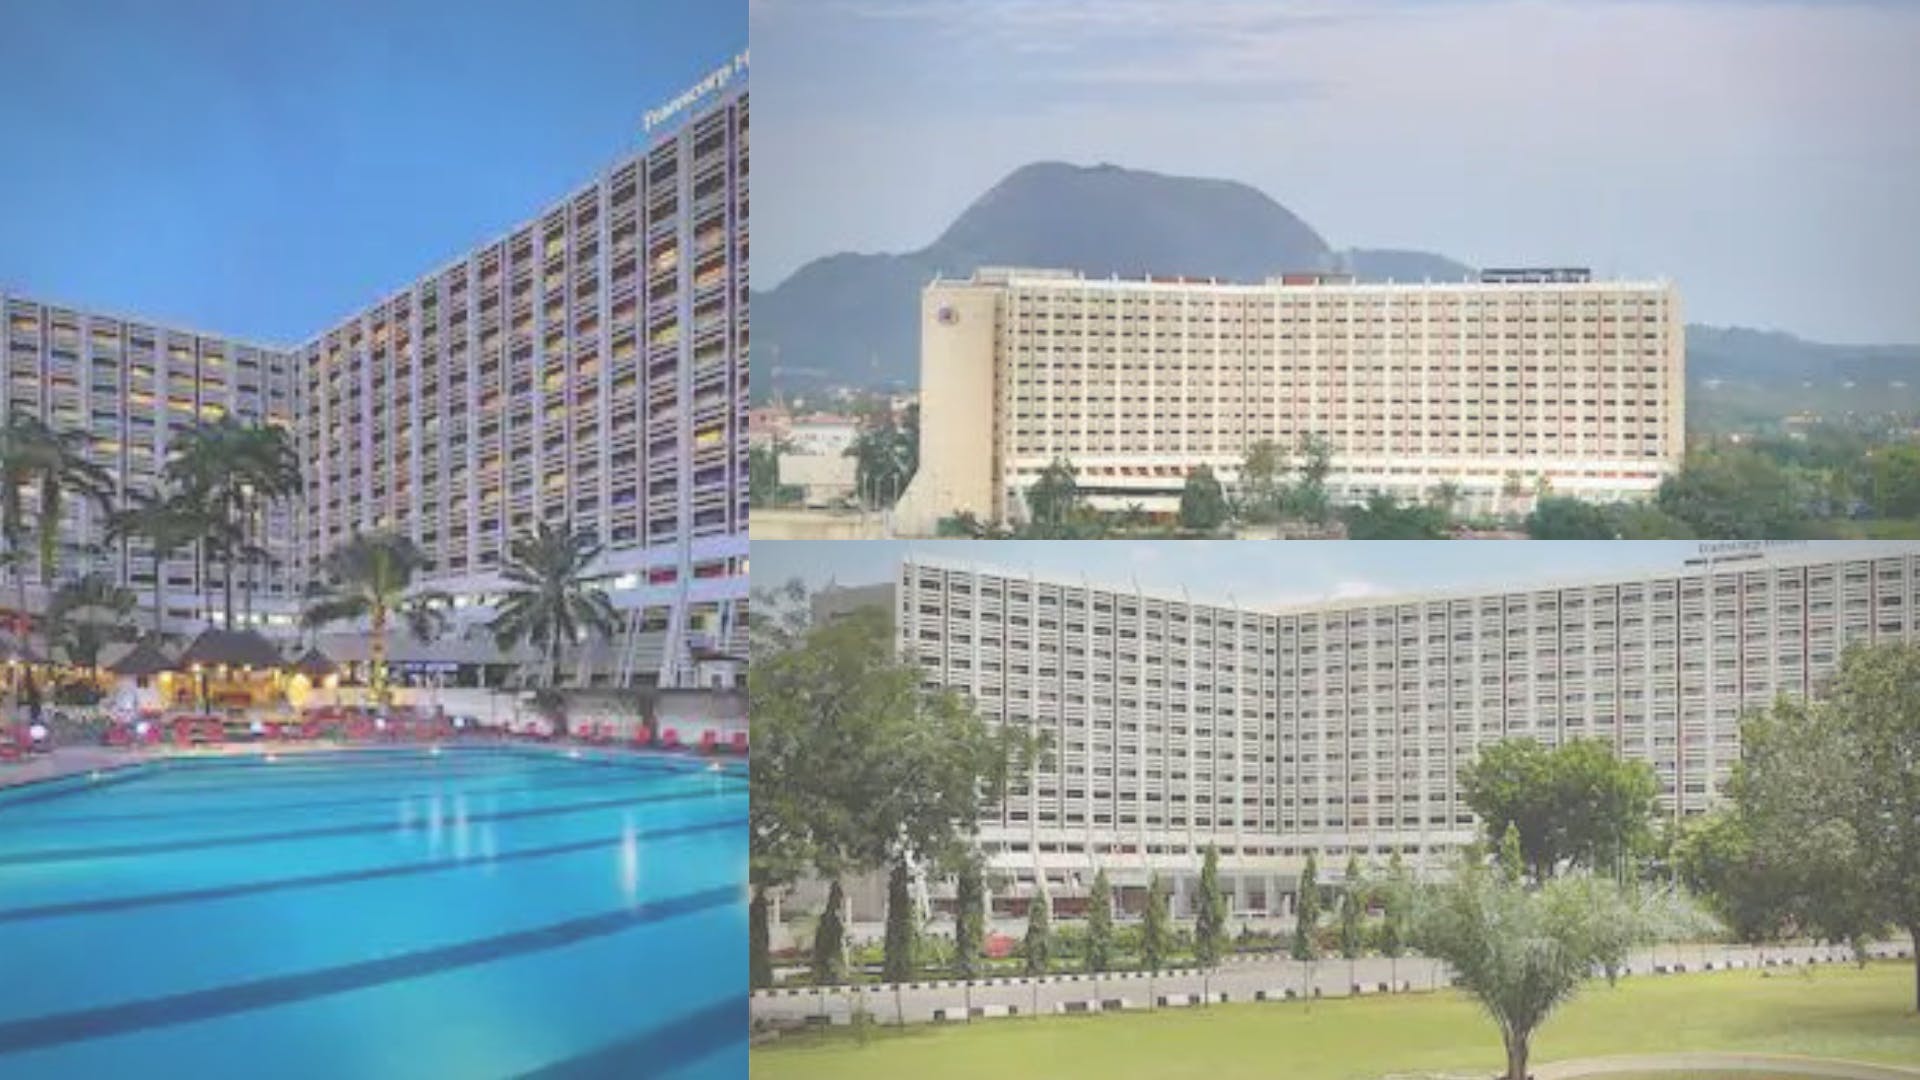 Transcorp Hilton Hotel is the most expensive hotel in Nigeria